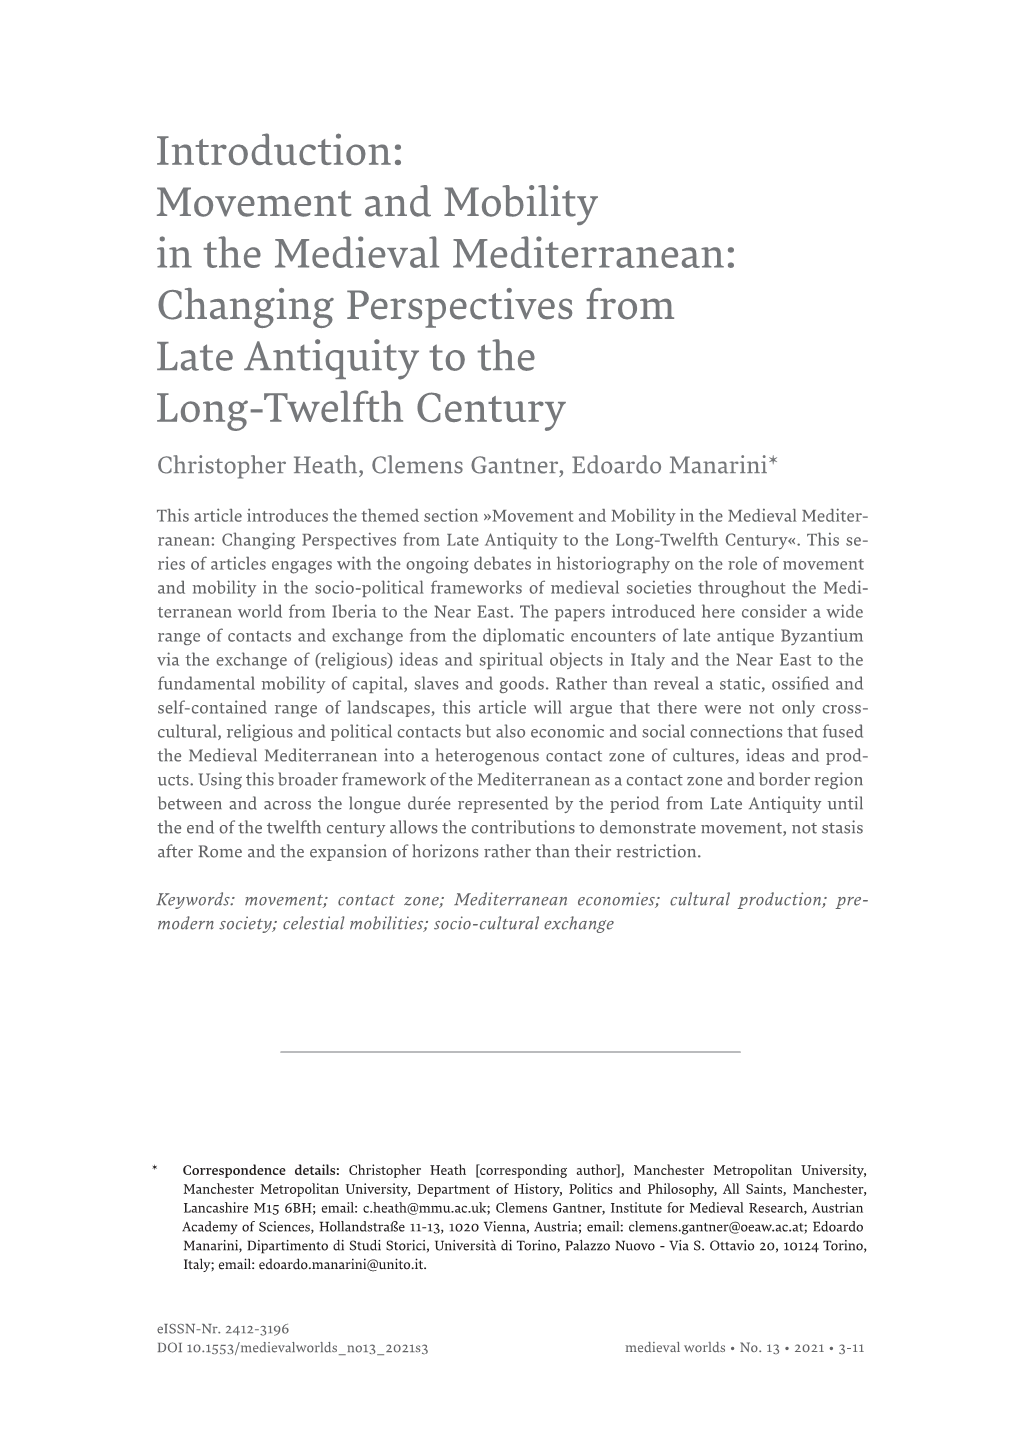 Movement and Mobility in the Medieval